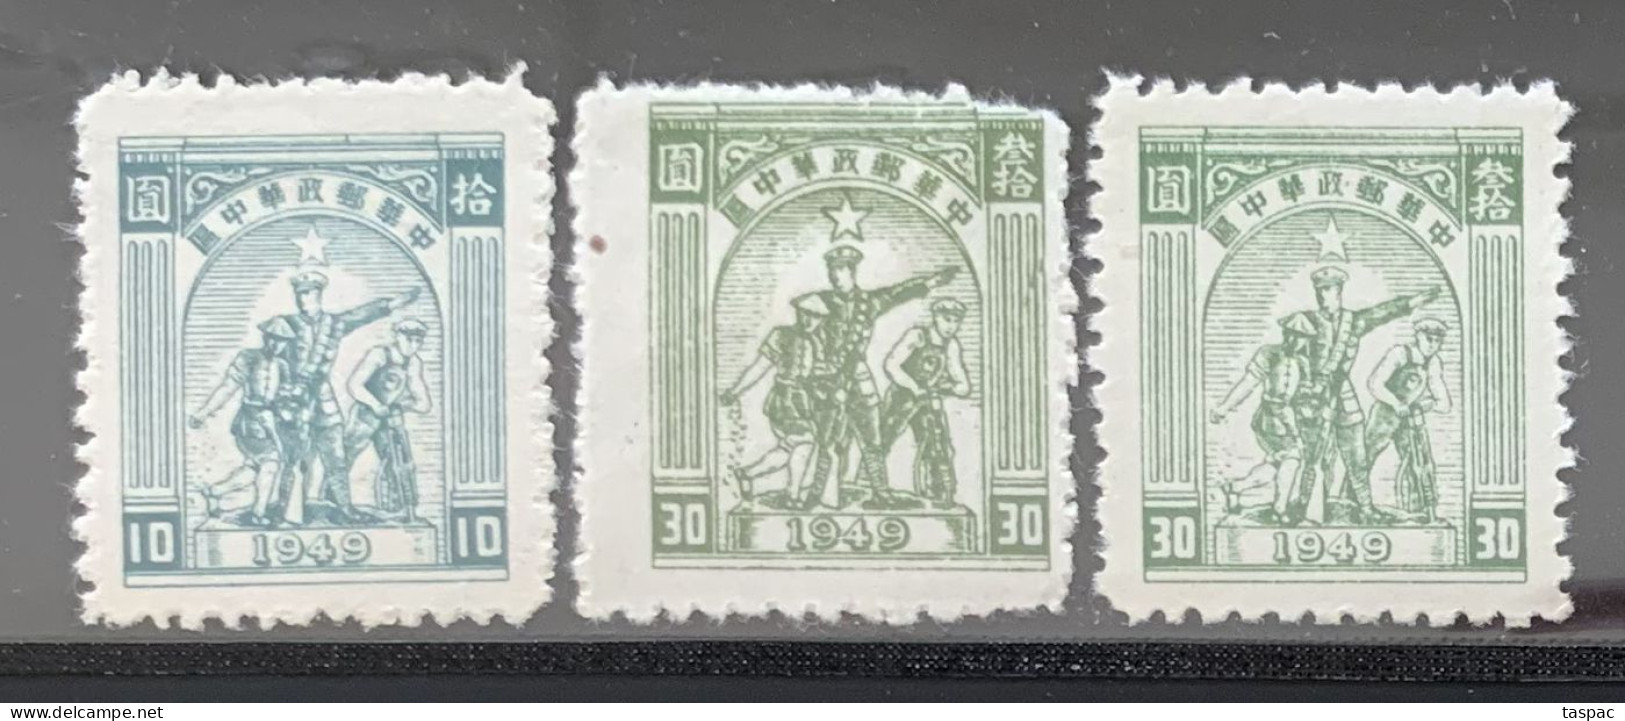 Central China 1949 Mi# 87, 89 A, 89 B (*) Mint No Gum - Short Set - Farmer, Soldier And Worker - Cina Centrale 1948-49